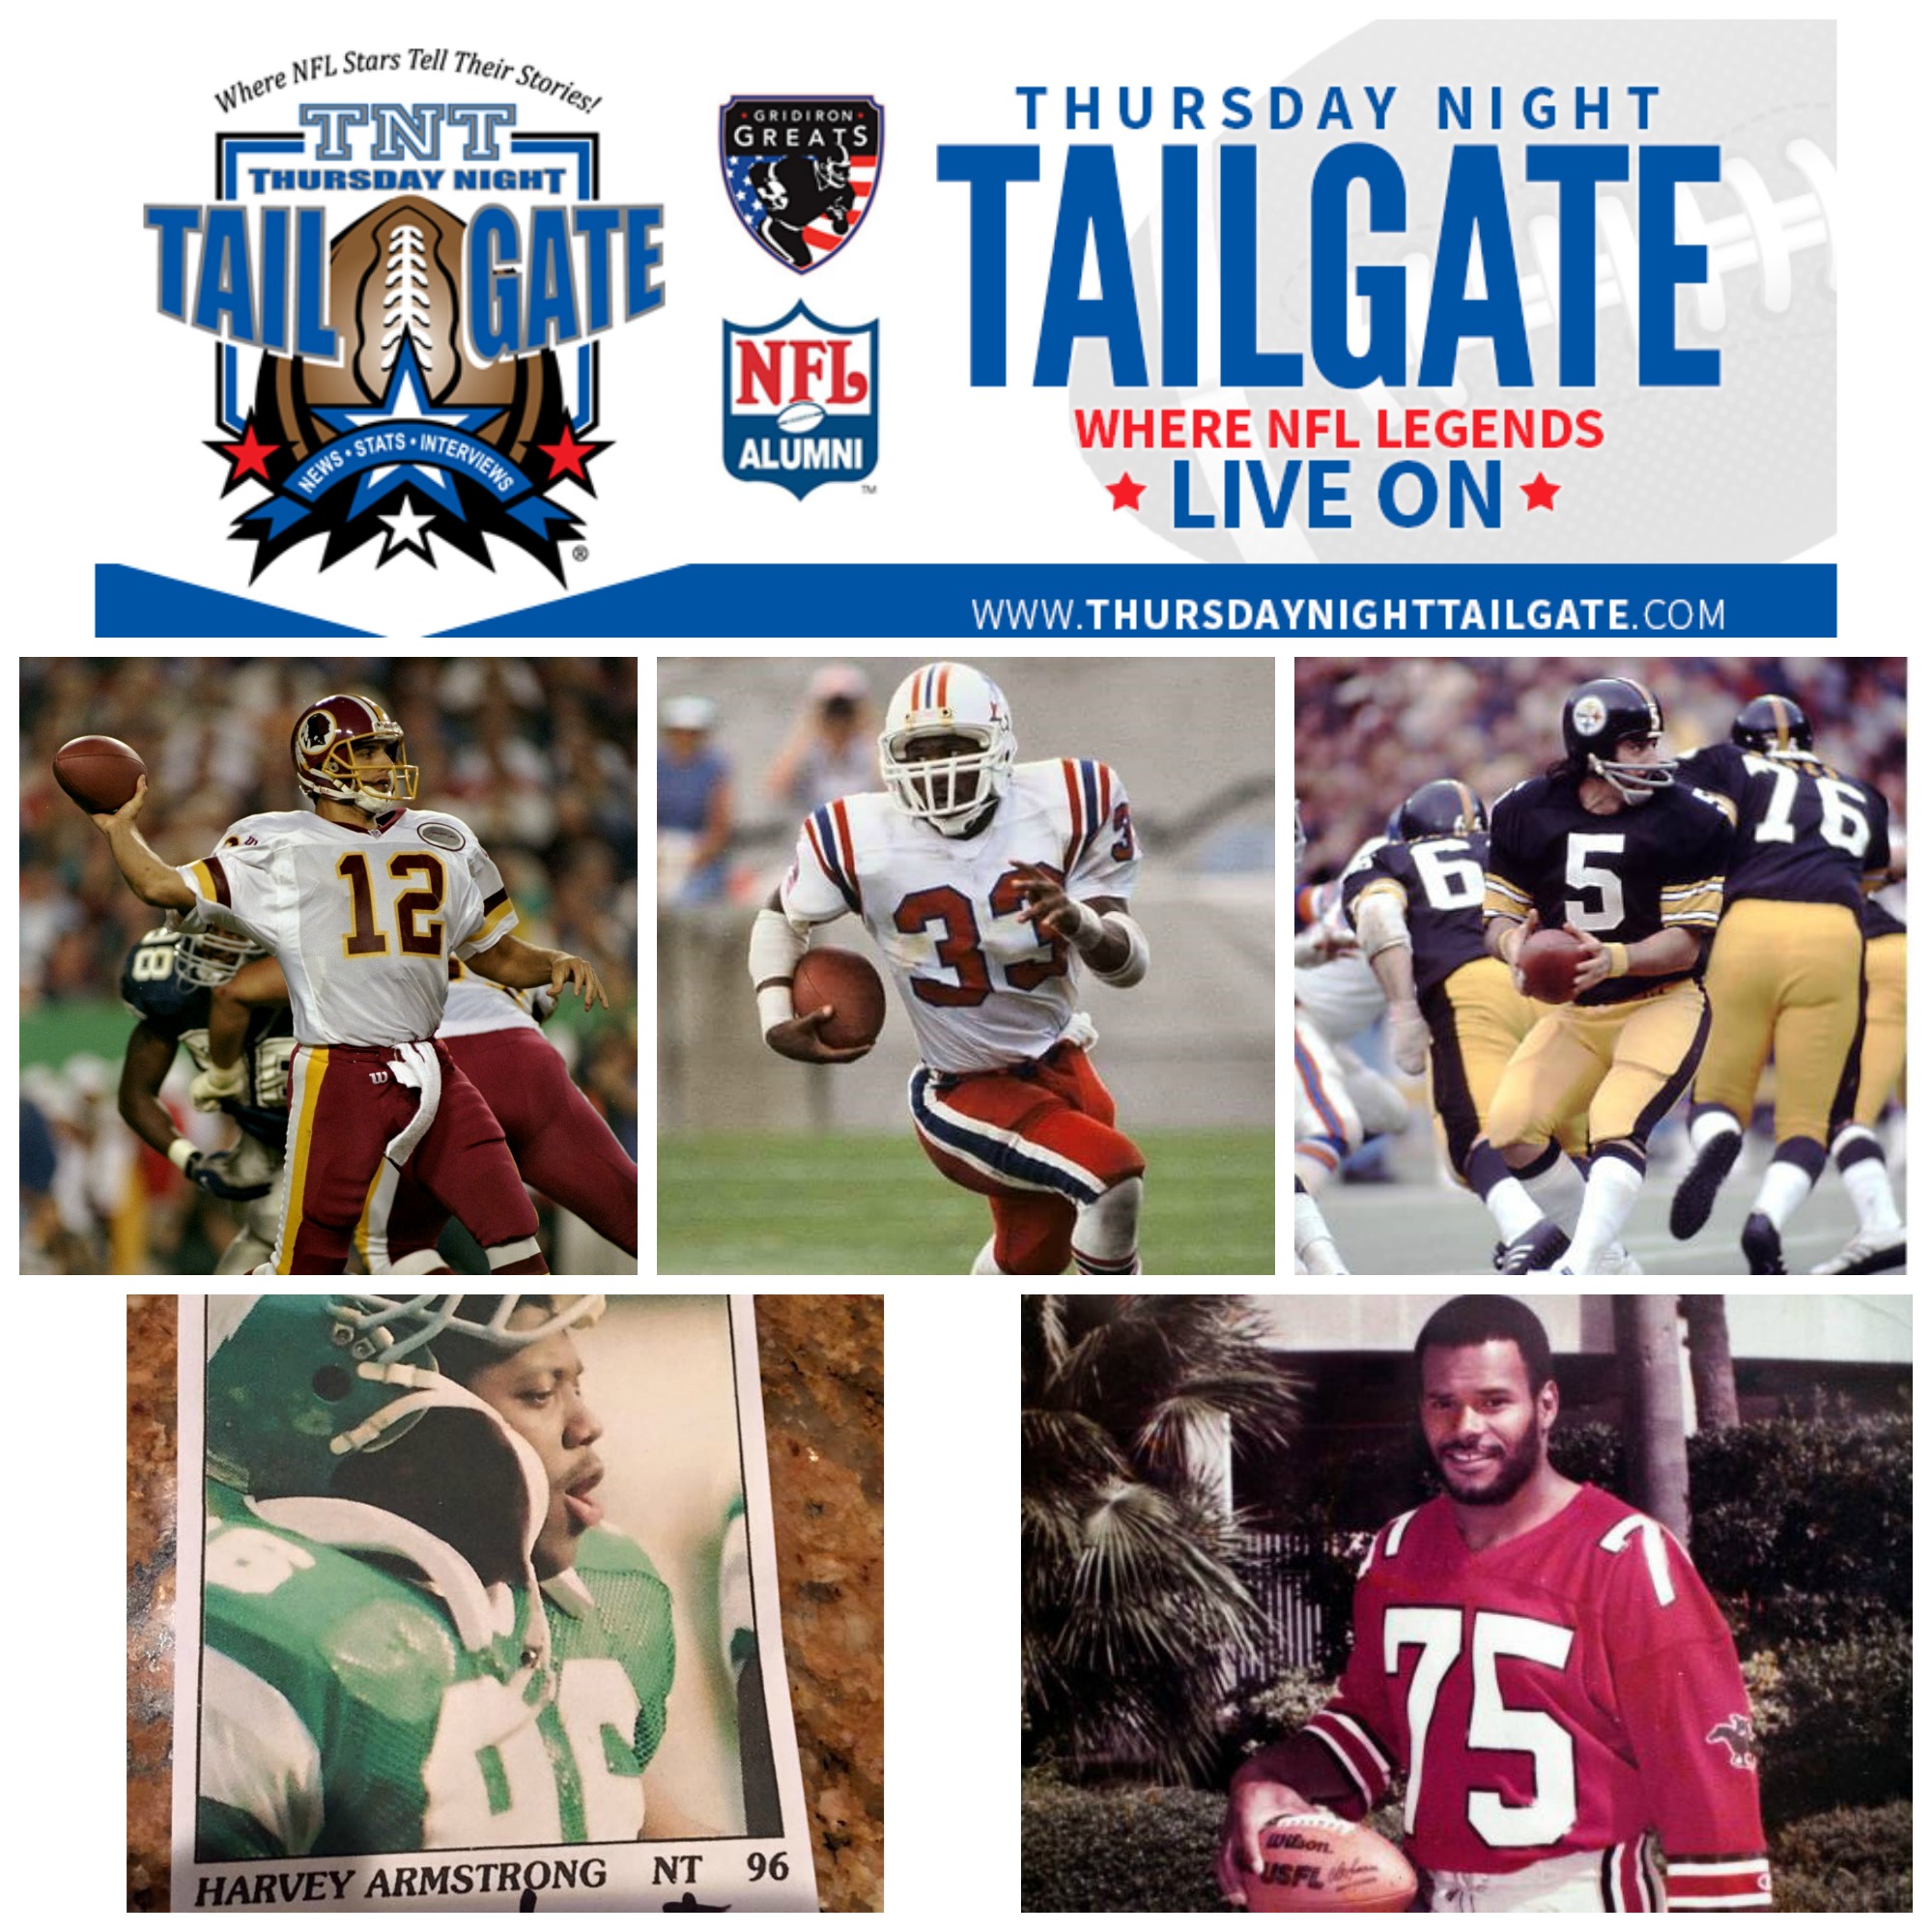 Hear NFL Legends: Gus Frerotte, Tony Collins, Terry Hanratty, Harvey Armstrong, and Walter Carter sharing stories from their college and NFL playing days...